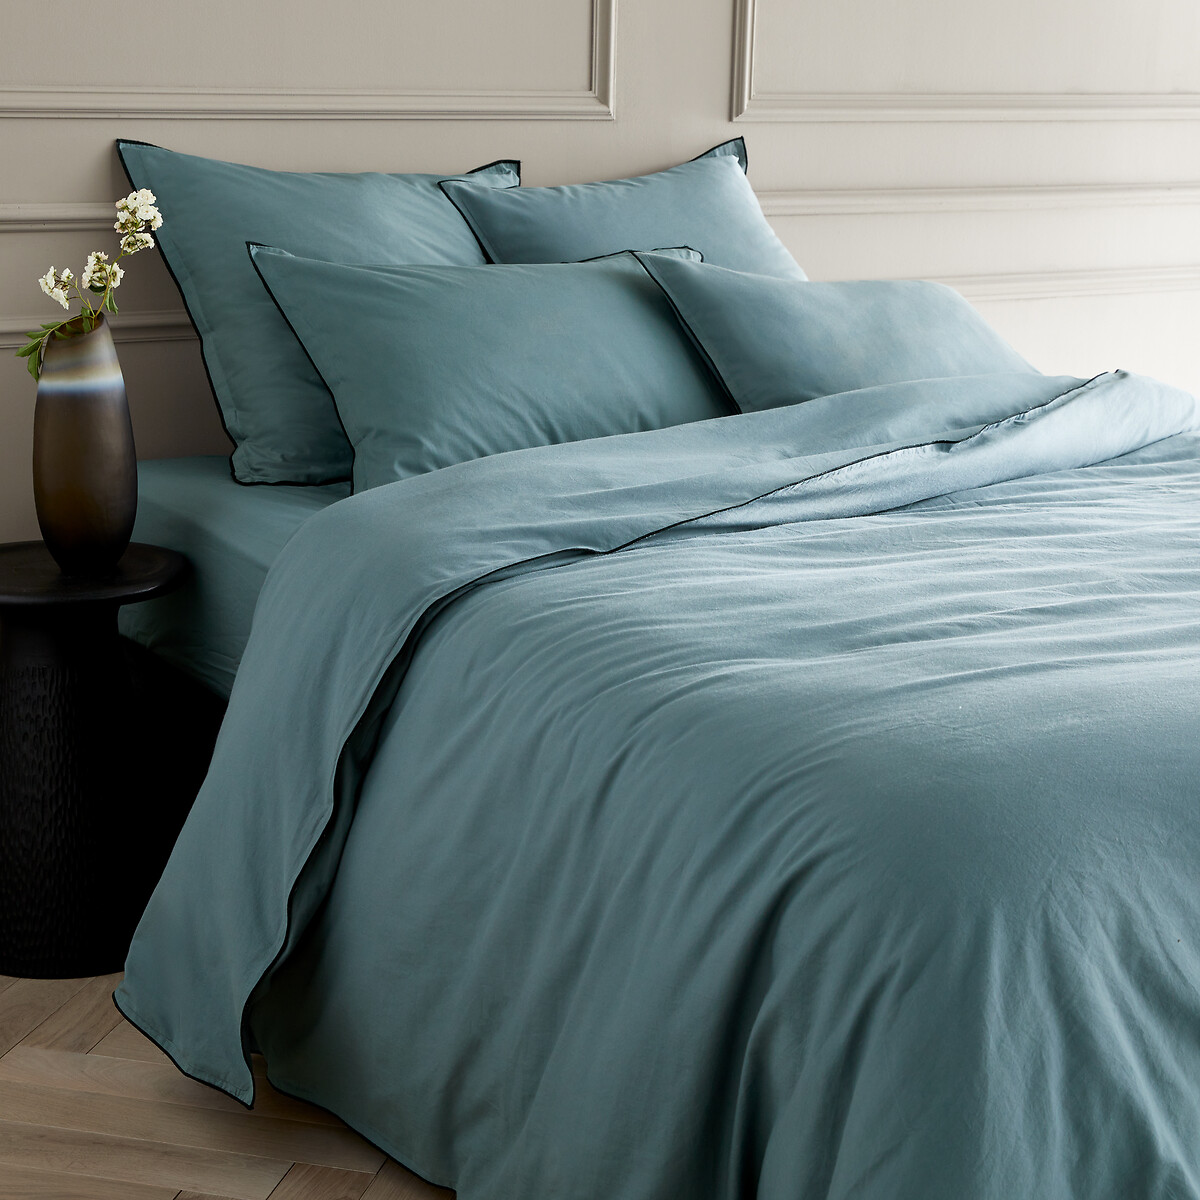 Washed Cotton Voile 400 Thread Count Duvet Cover